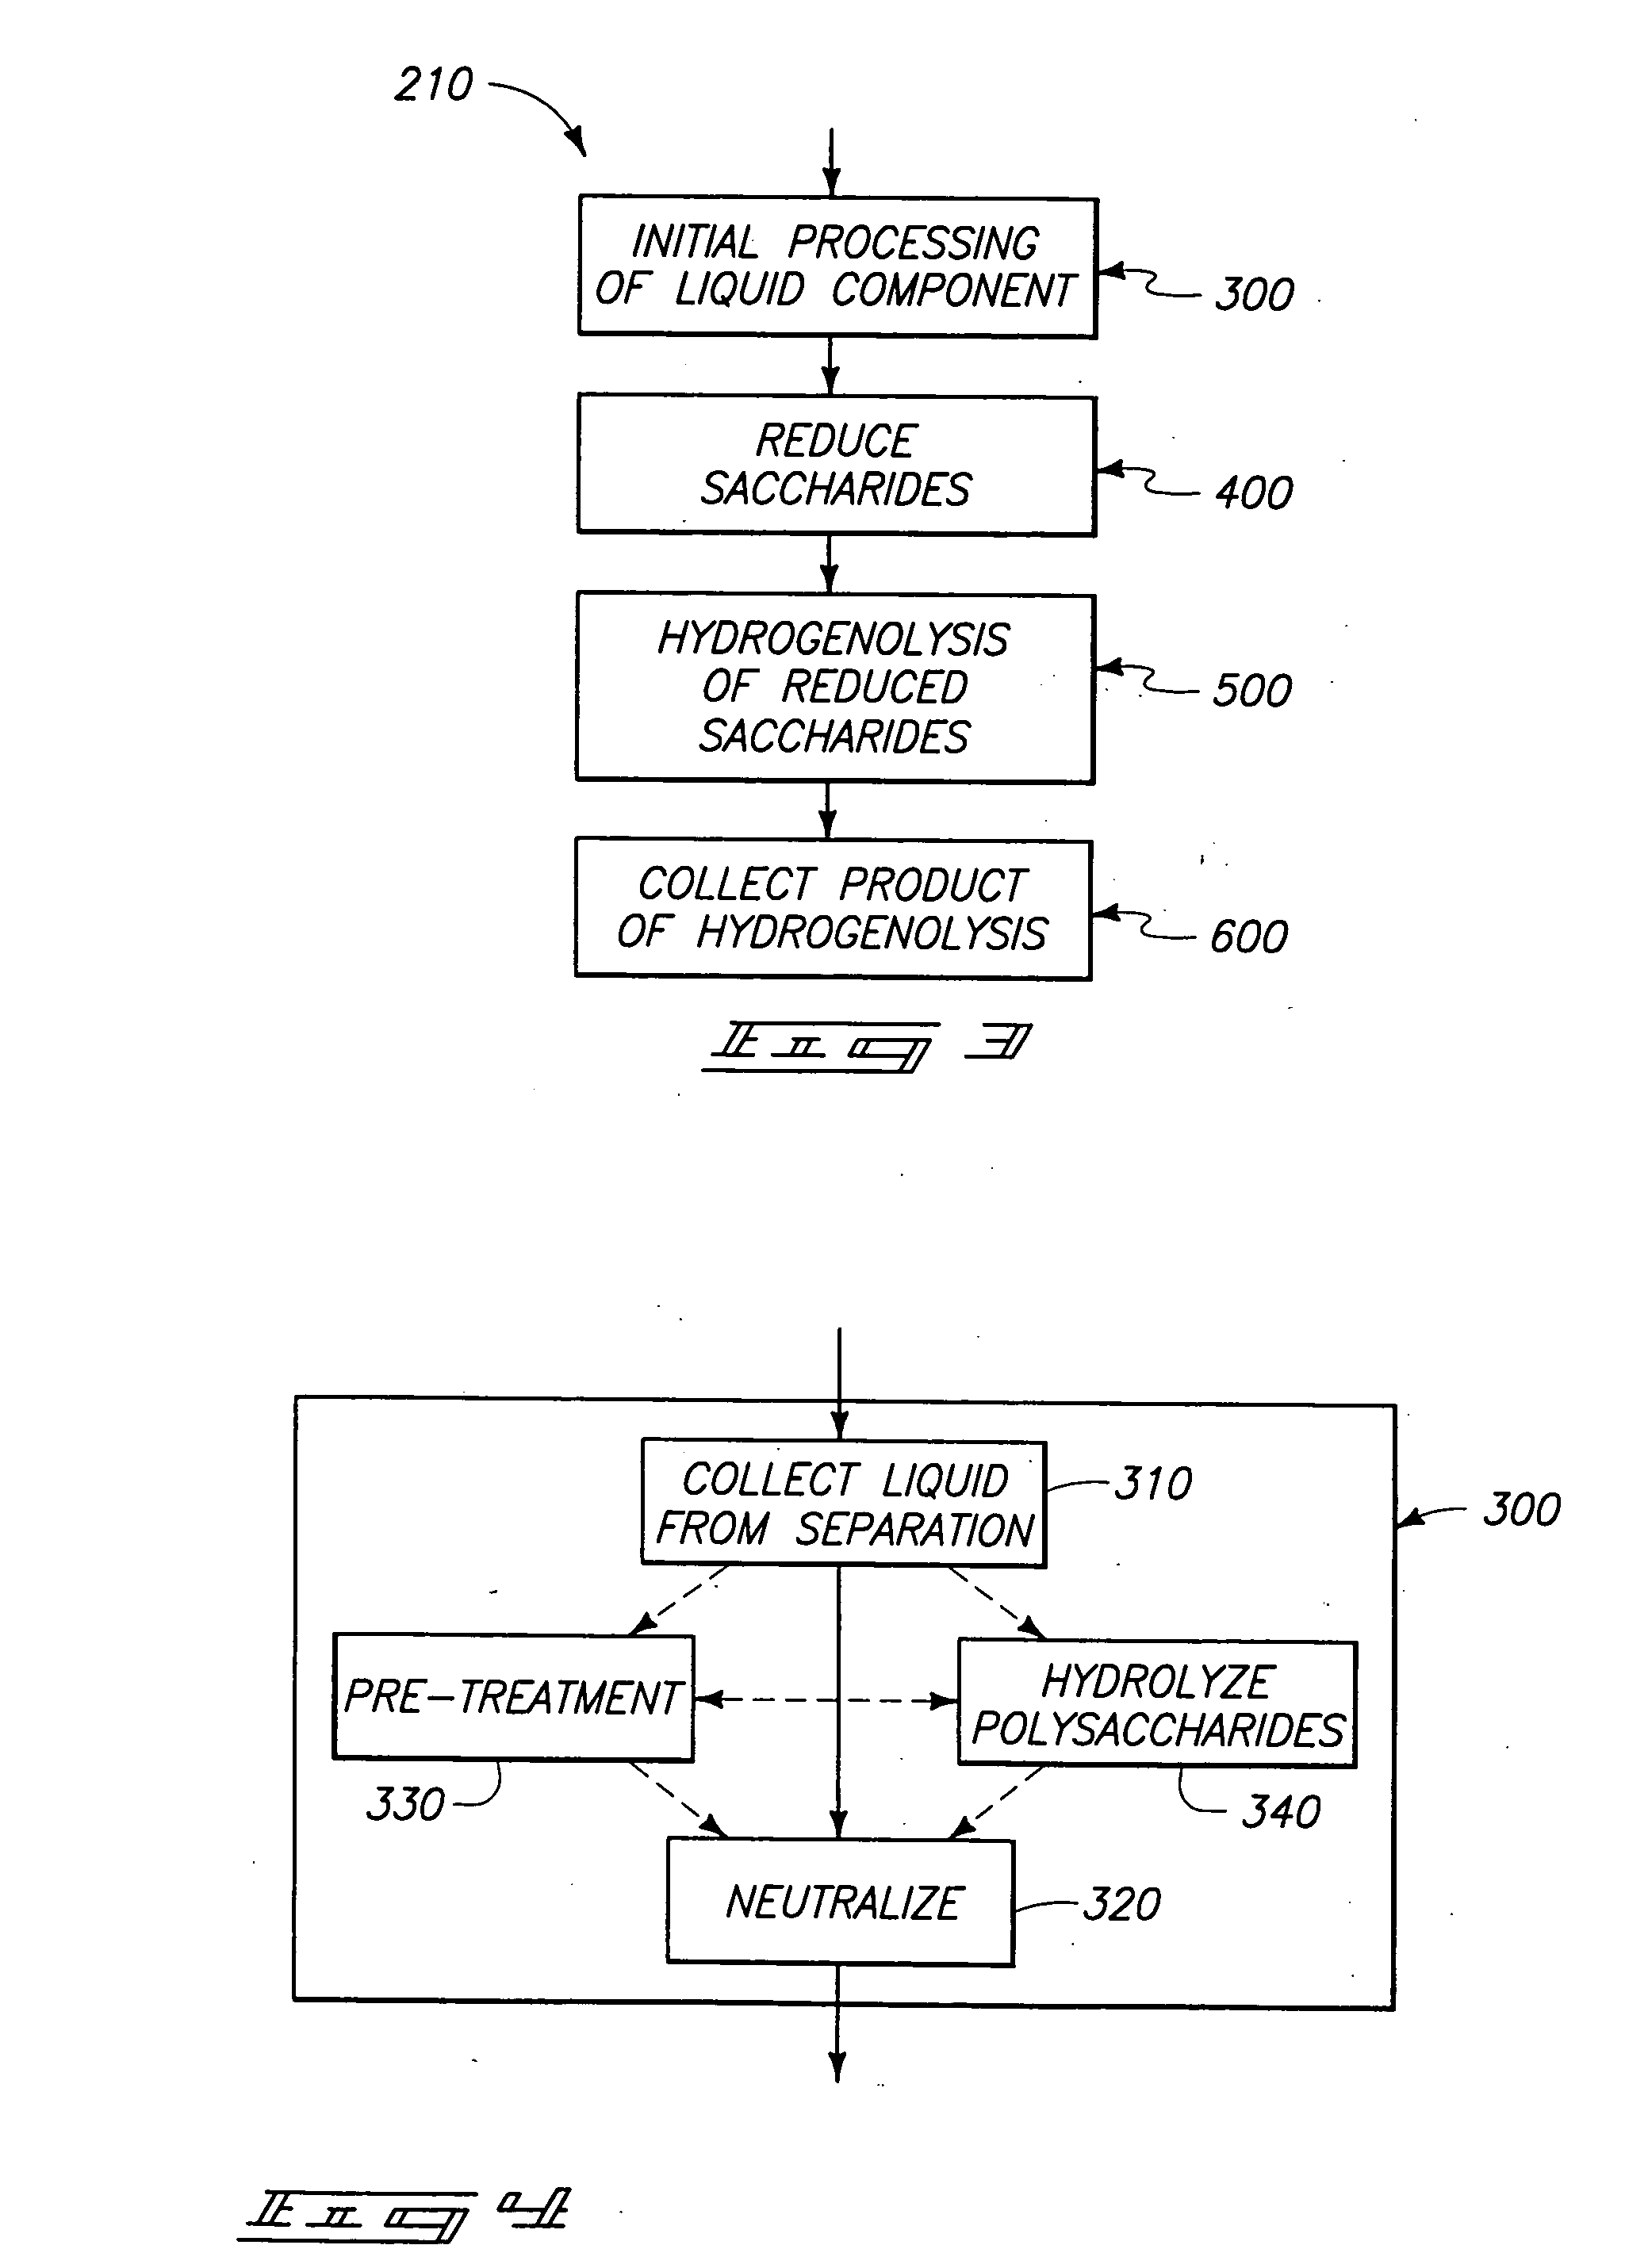 Methods of producing compounds from plant material